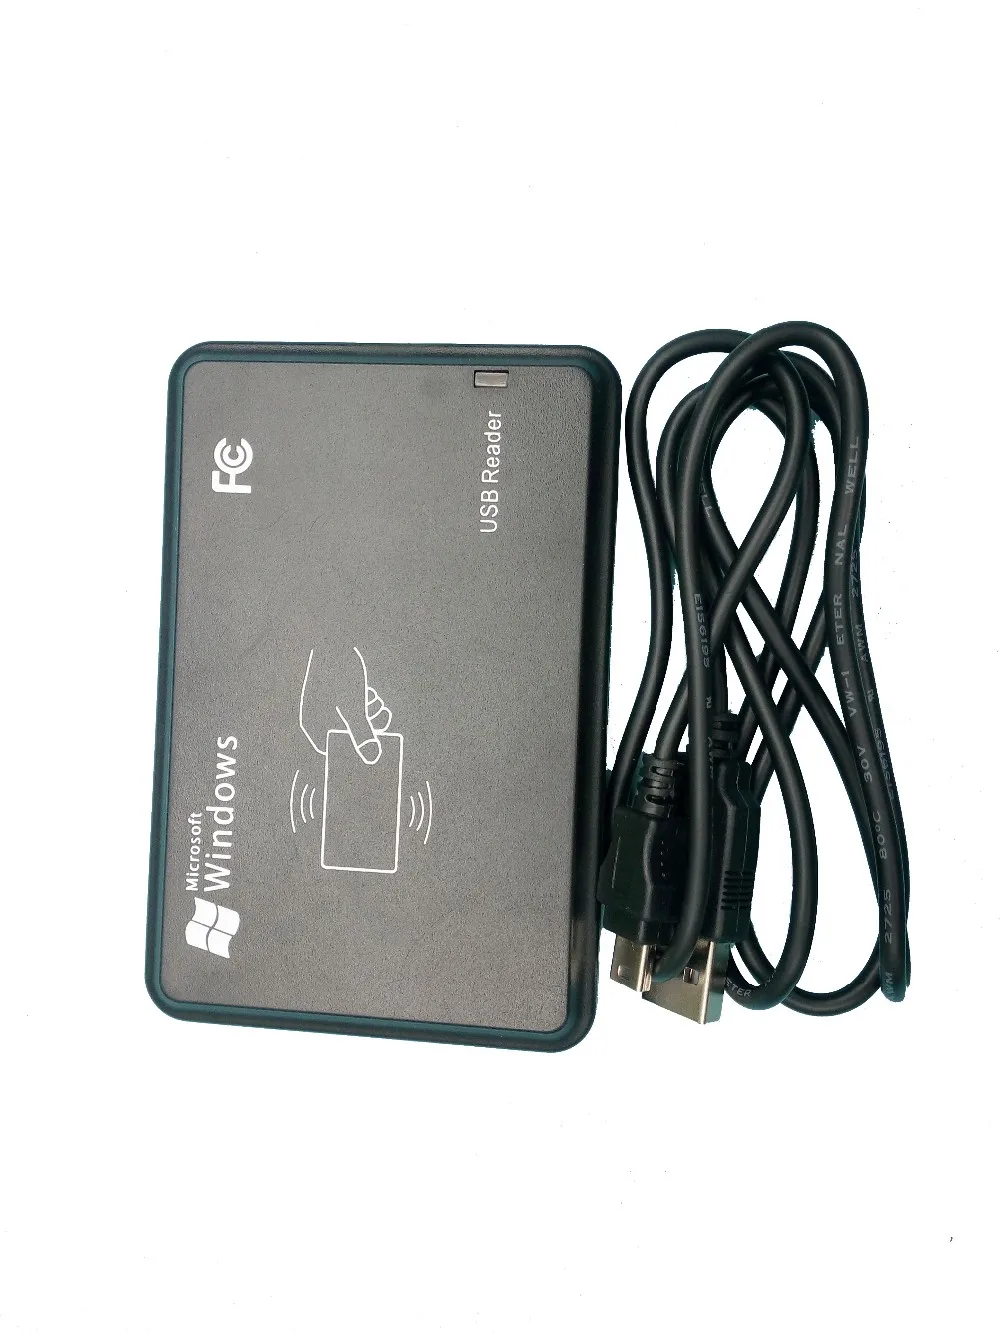 prolific usb to serial comm port software reader card gsm